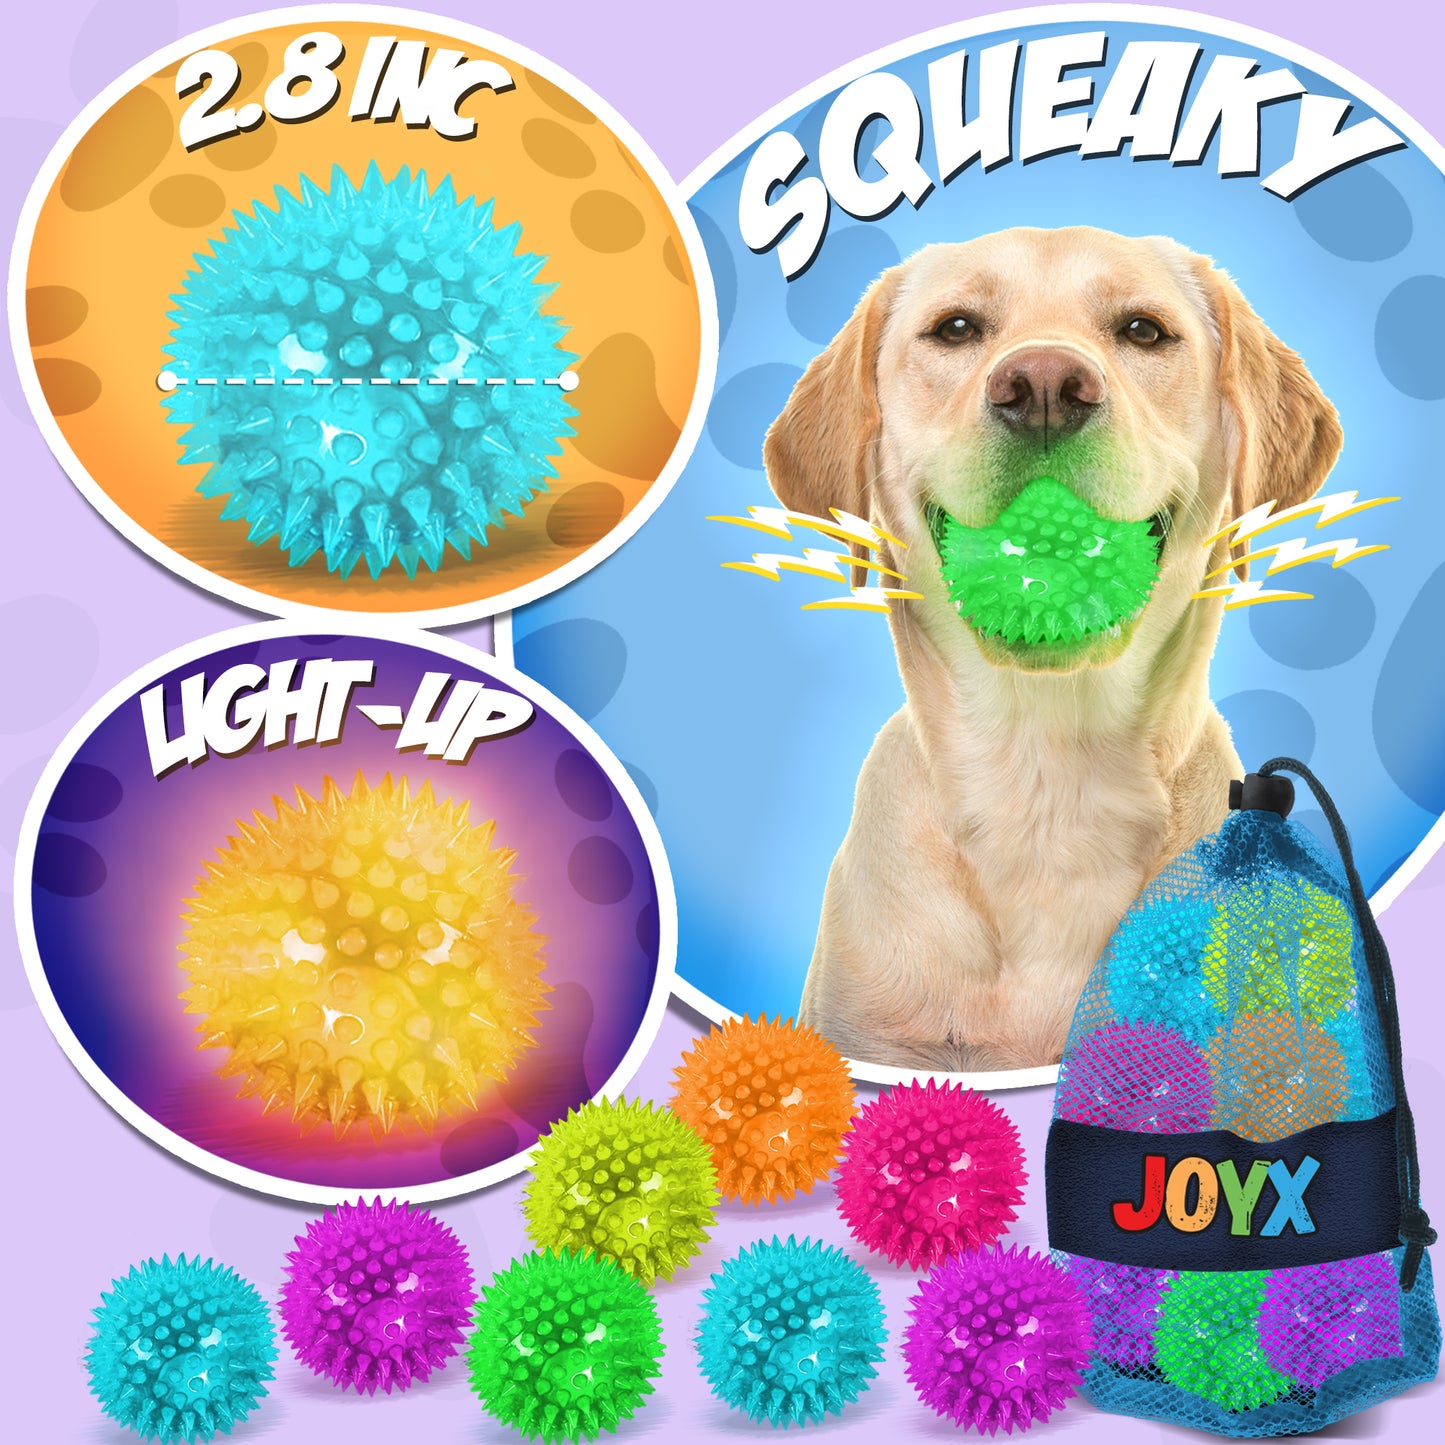 Dog toys that light up in various colors